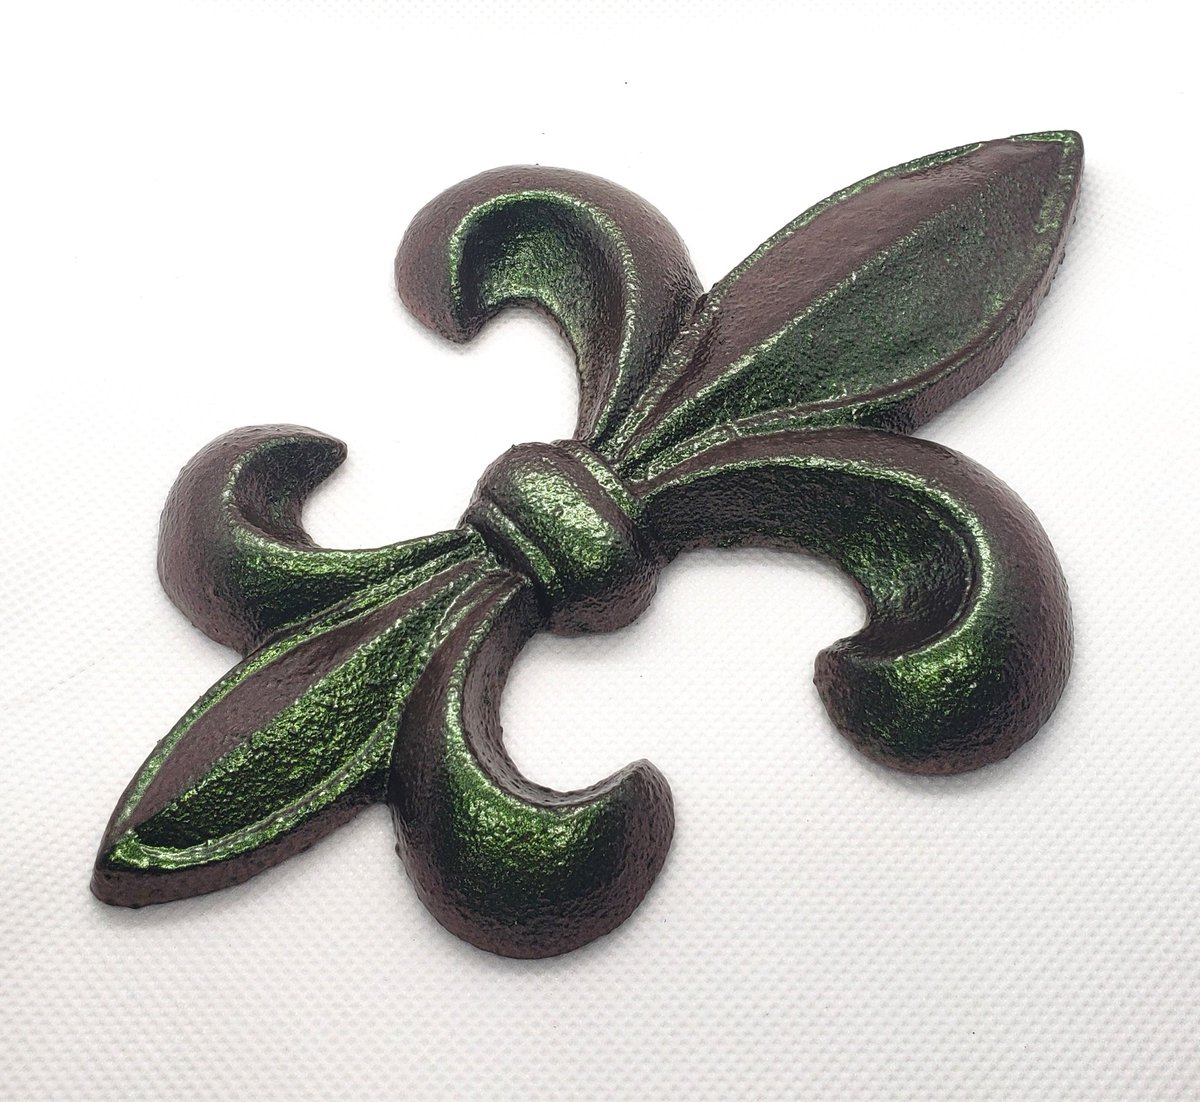 New Color Available In My #etsy Shop Called Green Cooper Colorshift Shown On A Cast Iron Fleur De Lis Wall Plaque.

#fleurdelis #walldecor #hangingdecor #hangingplaque #frenchdecor #wallhangingdecor #plaquedecor #homedecor #etsyseller #etsyshop  #etsygifts #etsyfinds #colorshift